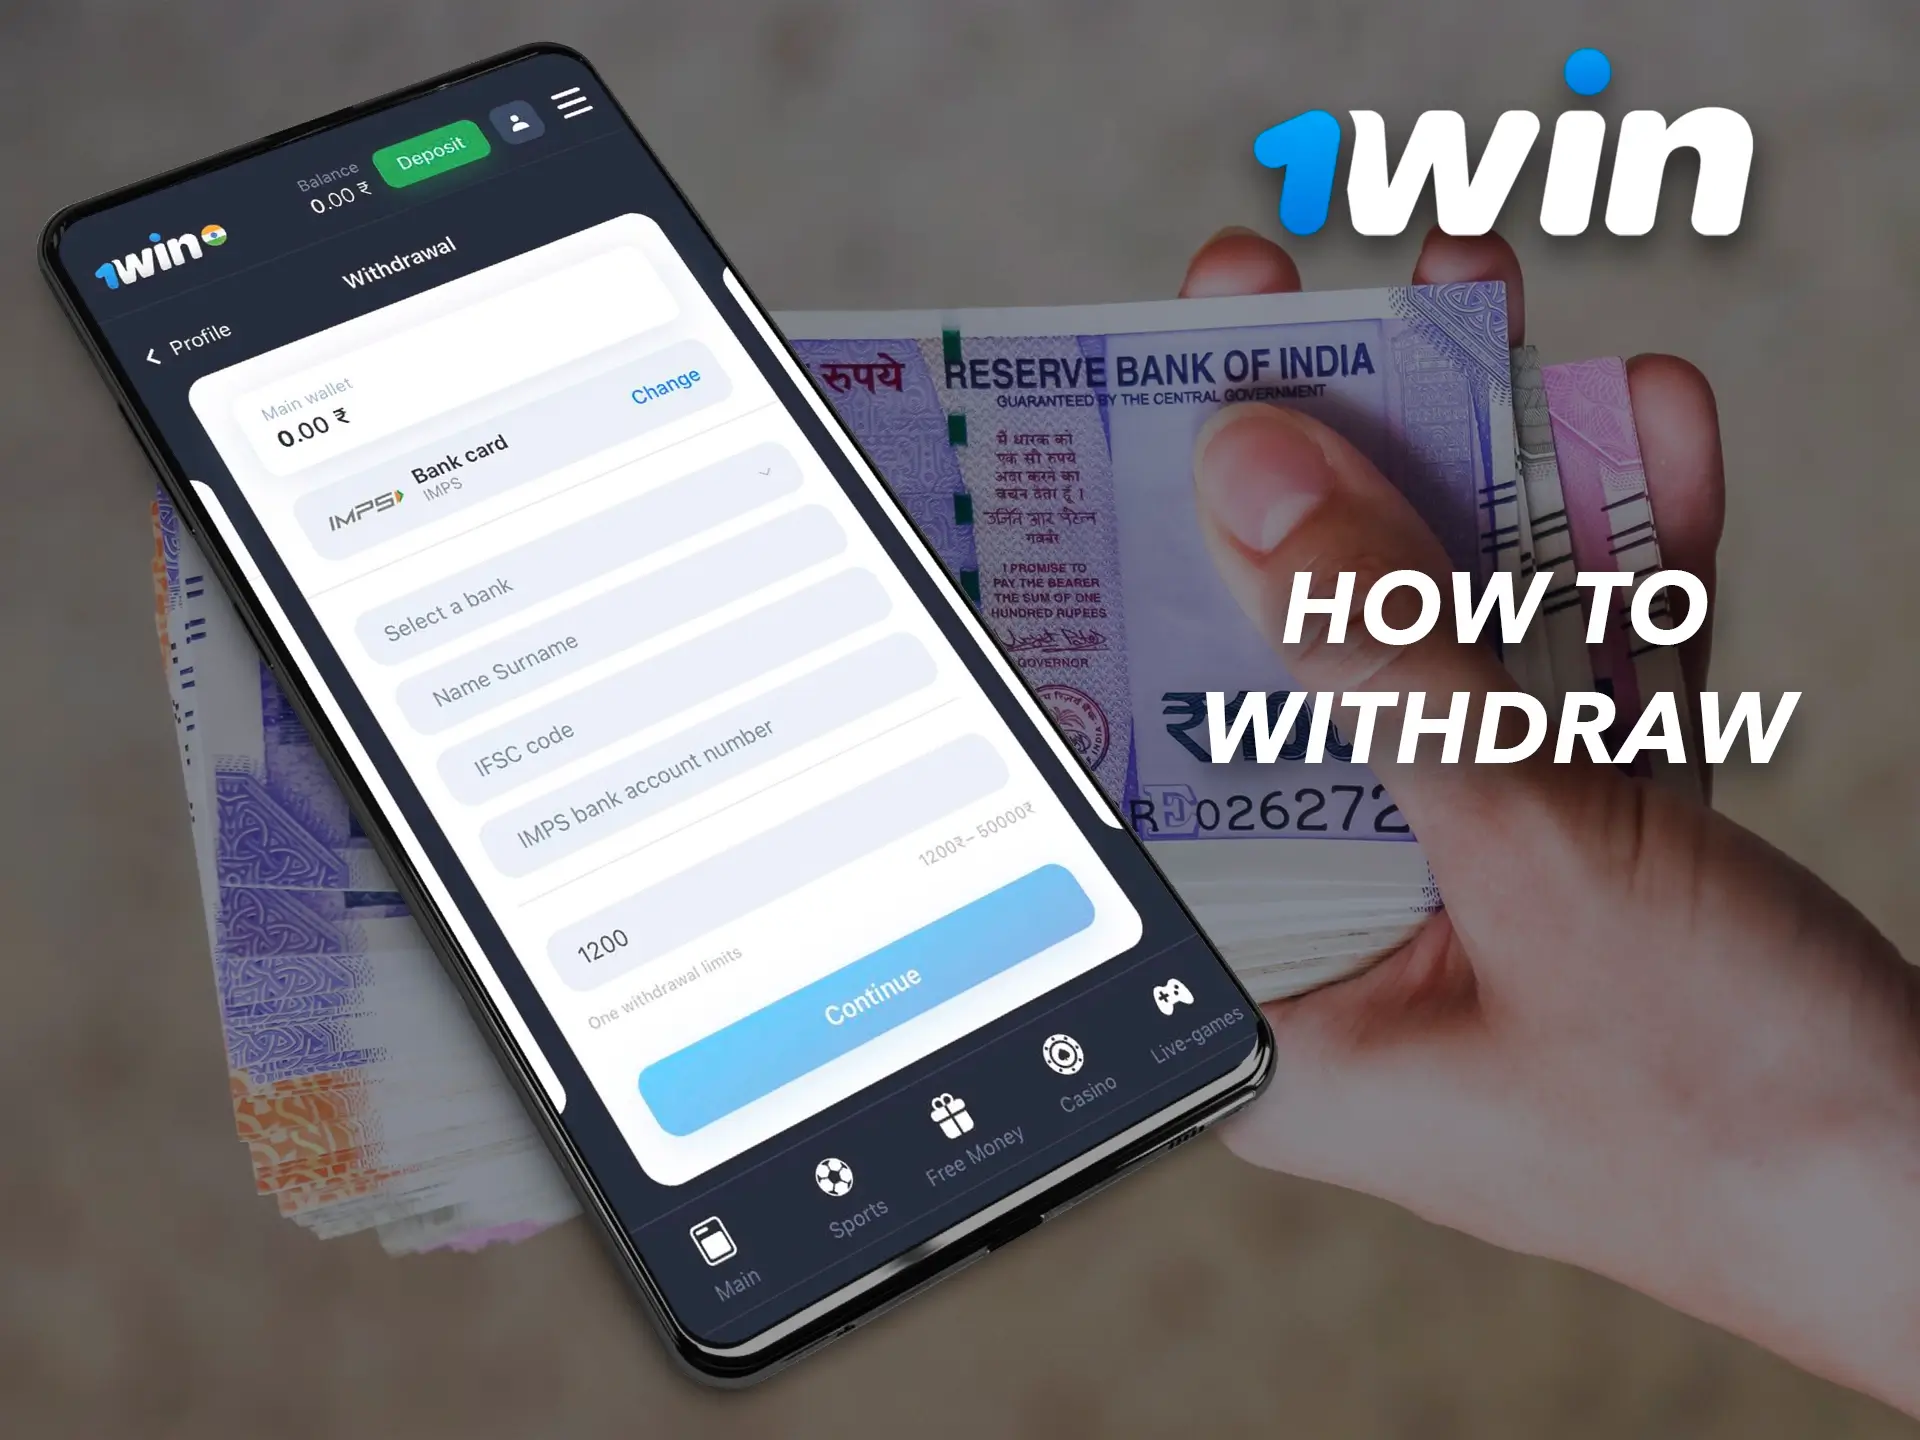 1Win is renowned for its fast payouts, just click on withdrawals to do so.